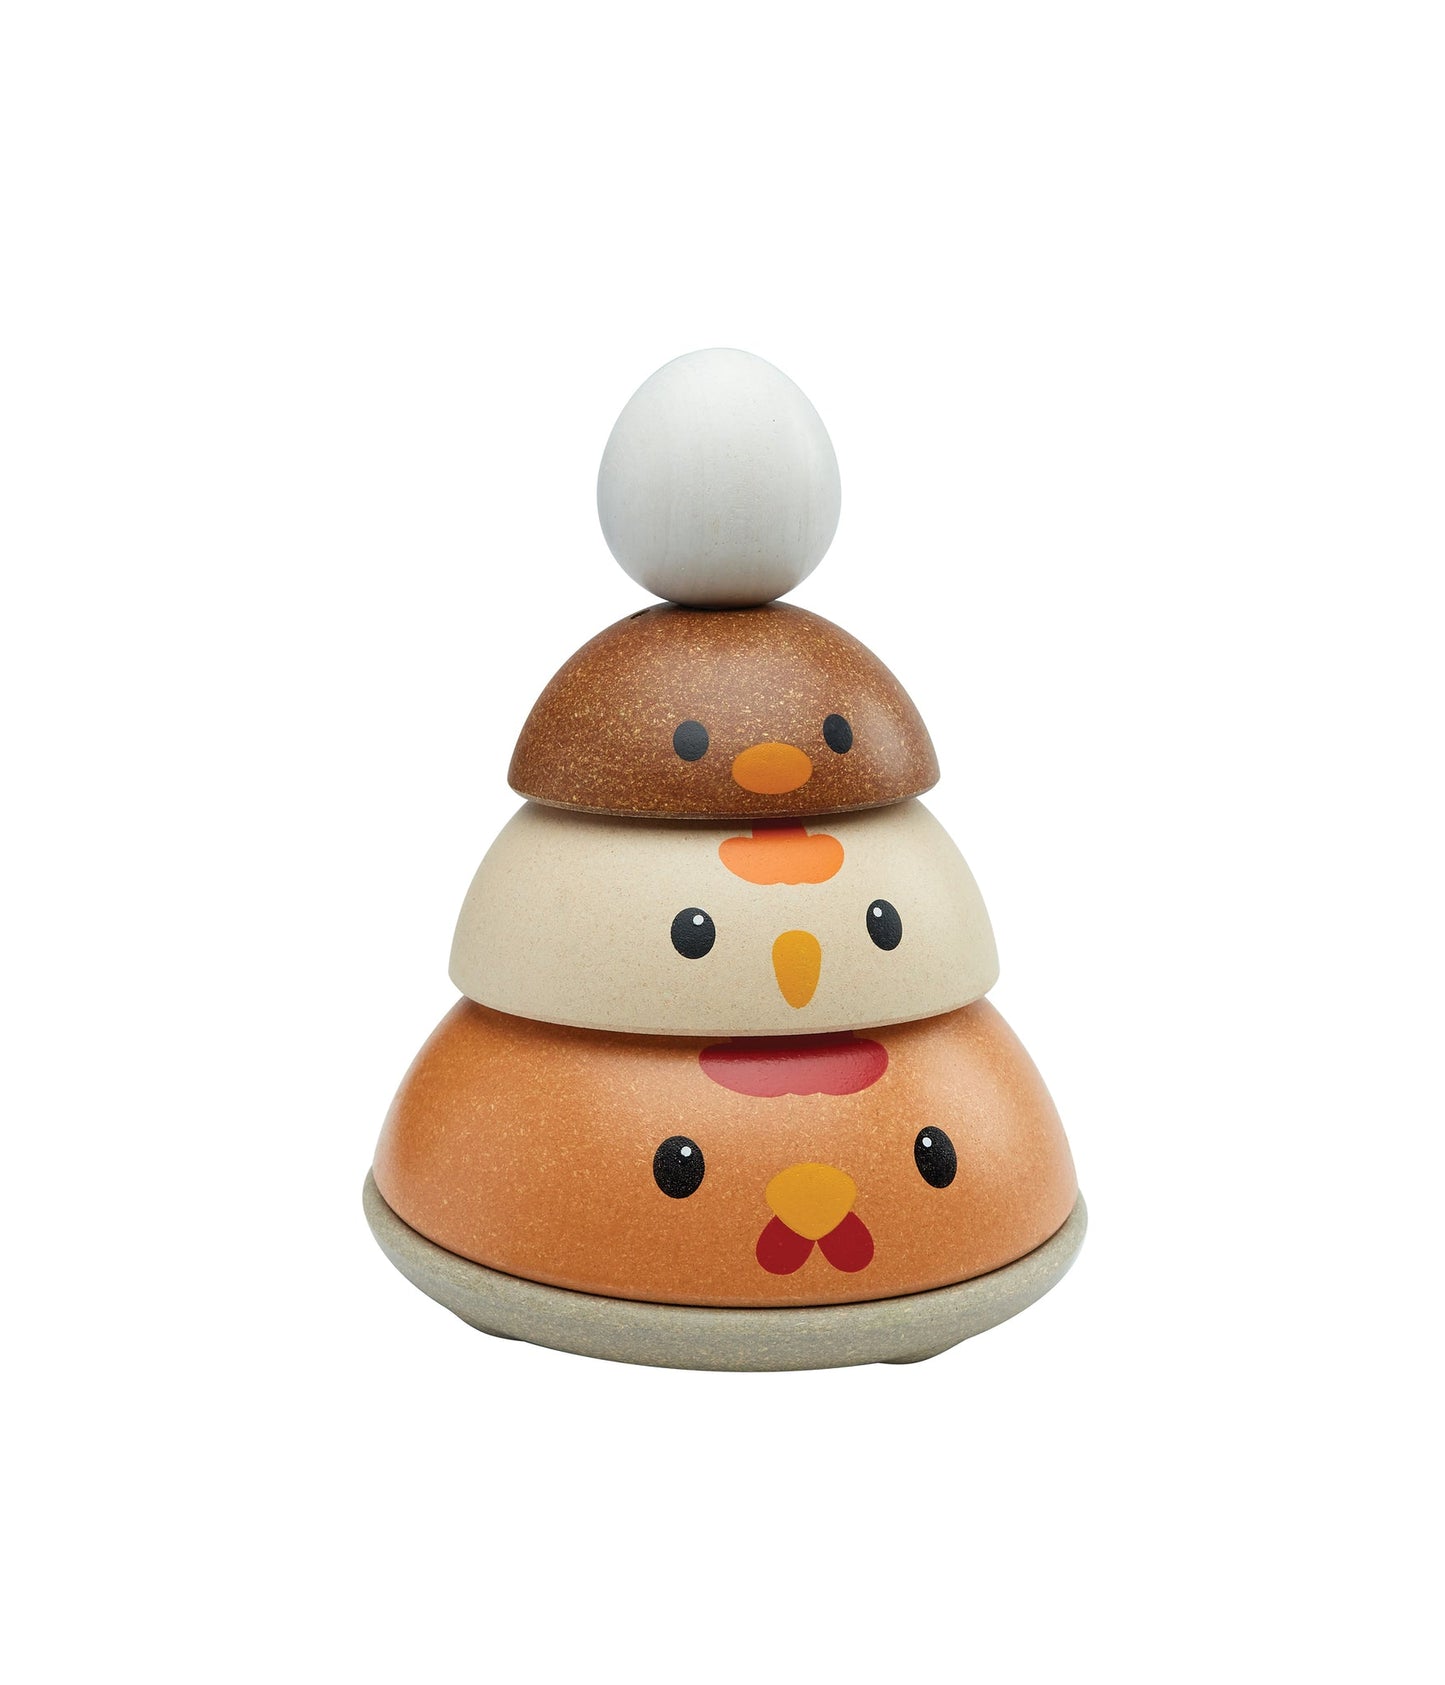 Chicken nesting stacking toy in rustic colour